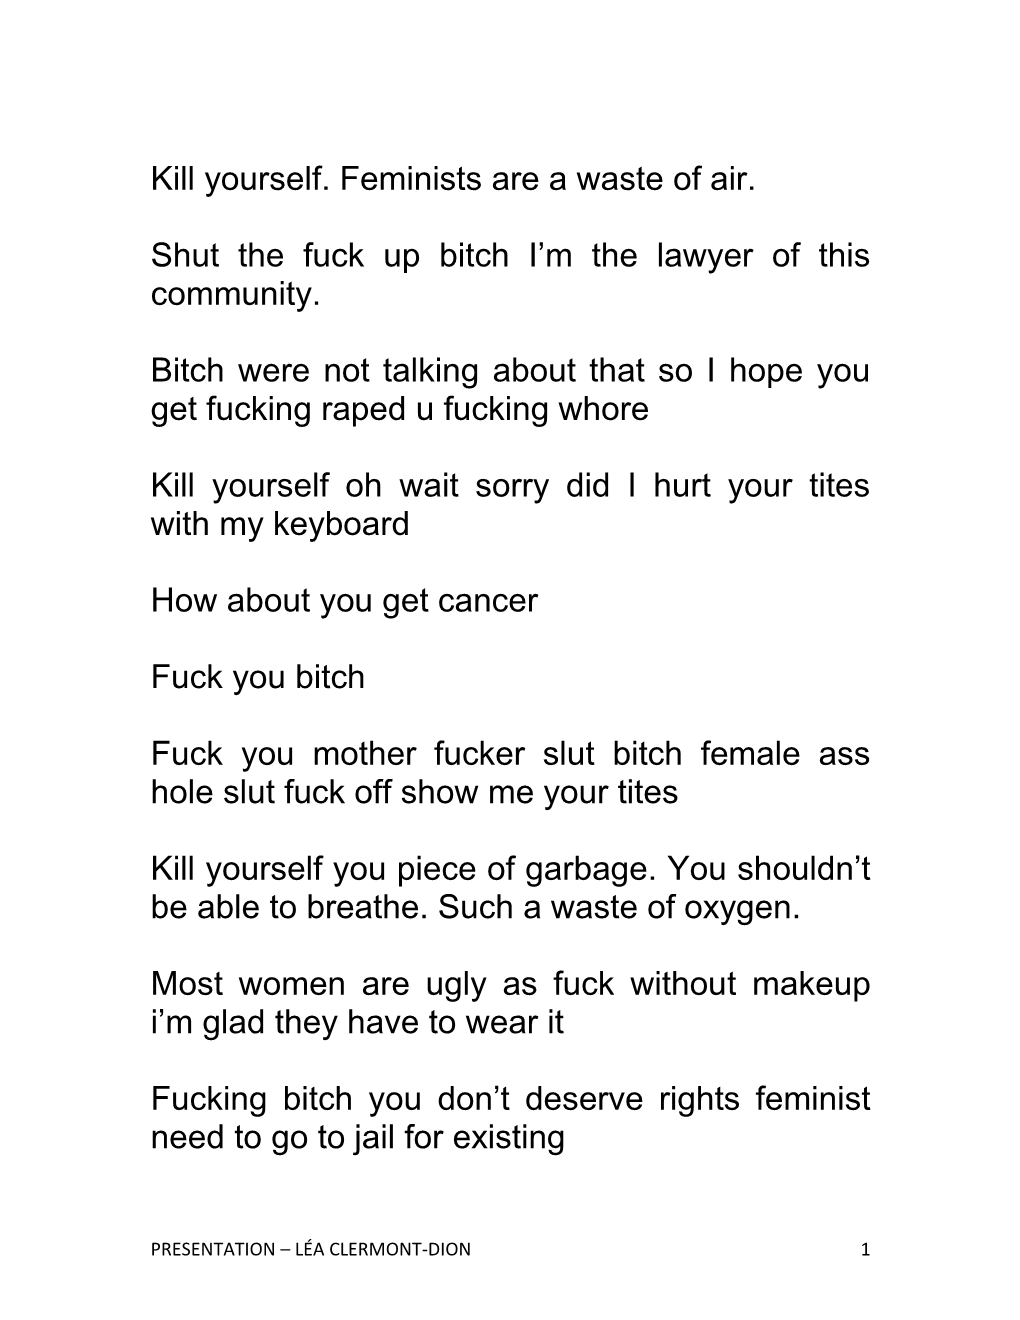 Kill Yourself. Feminists Are a Waste of Air. Shut the Fuck up Bitch I'm The